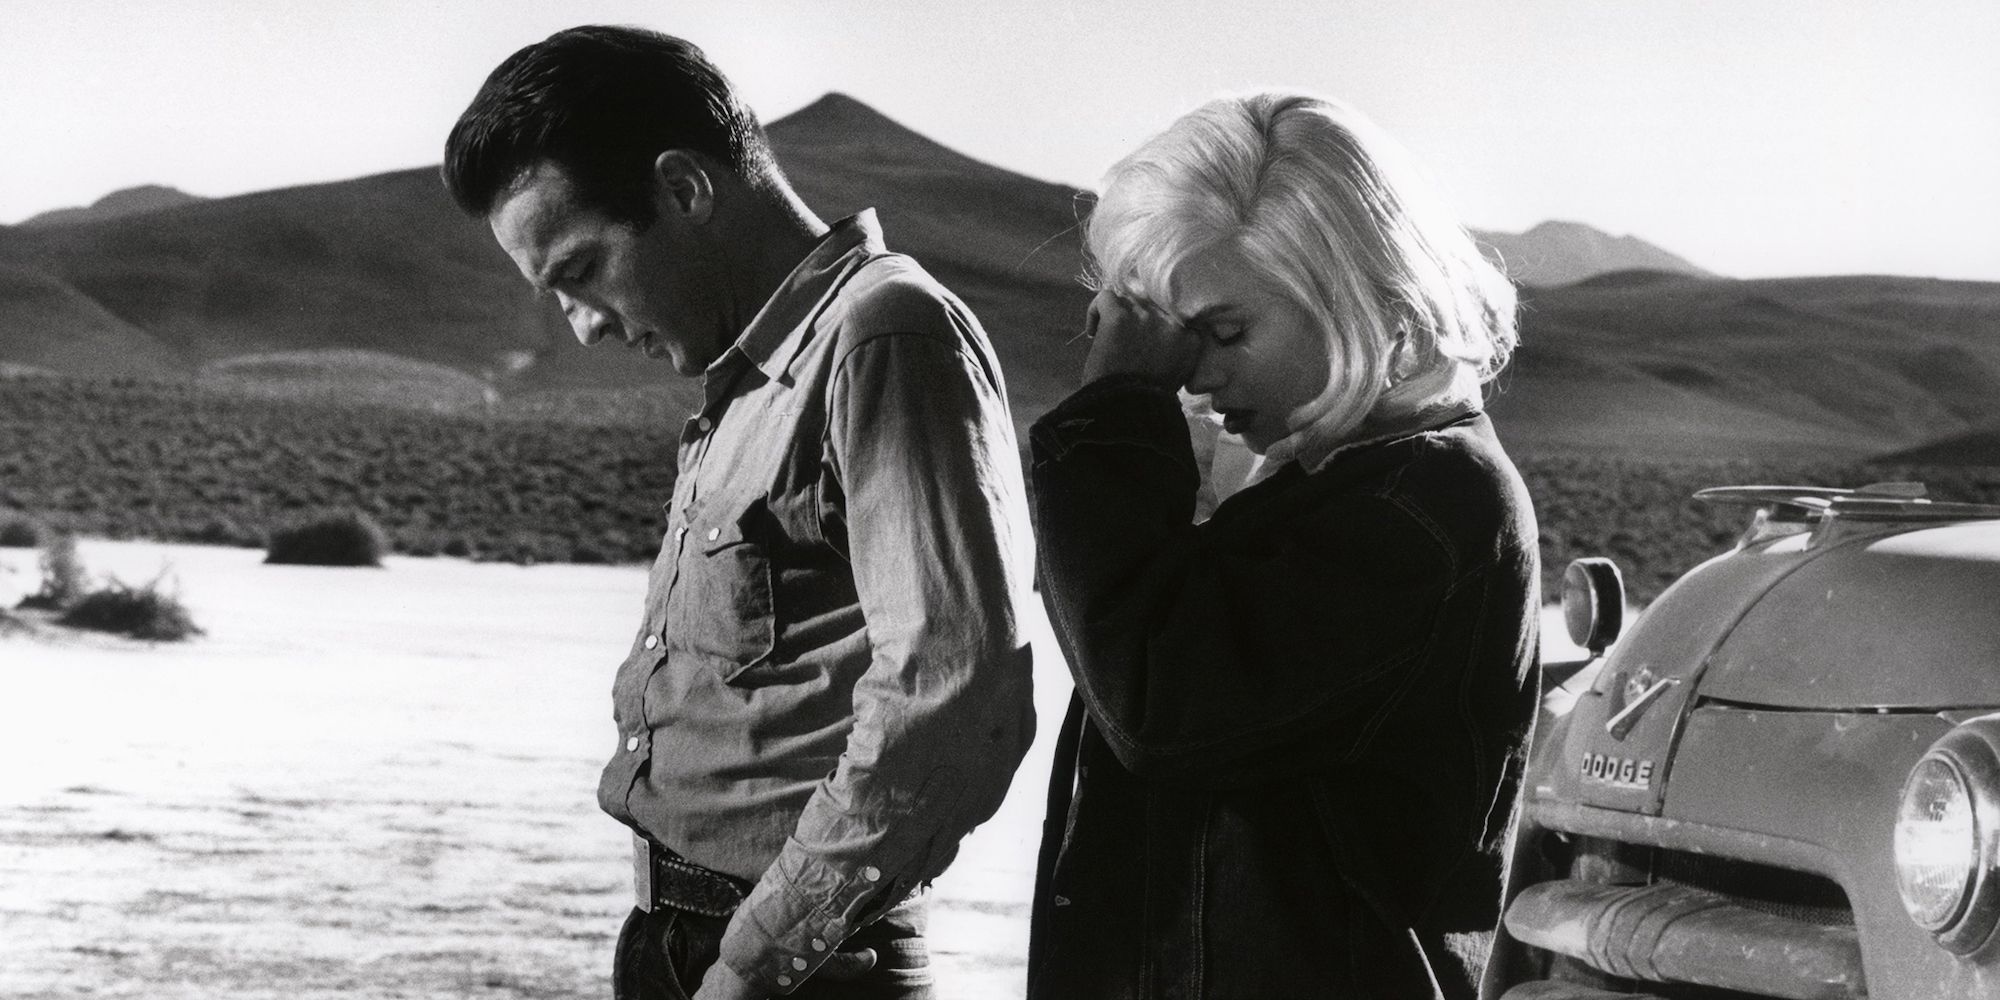 Perce and Roslyn in the desert in The Misfits.